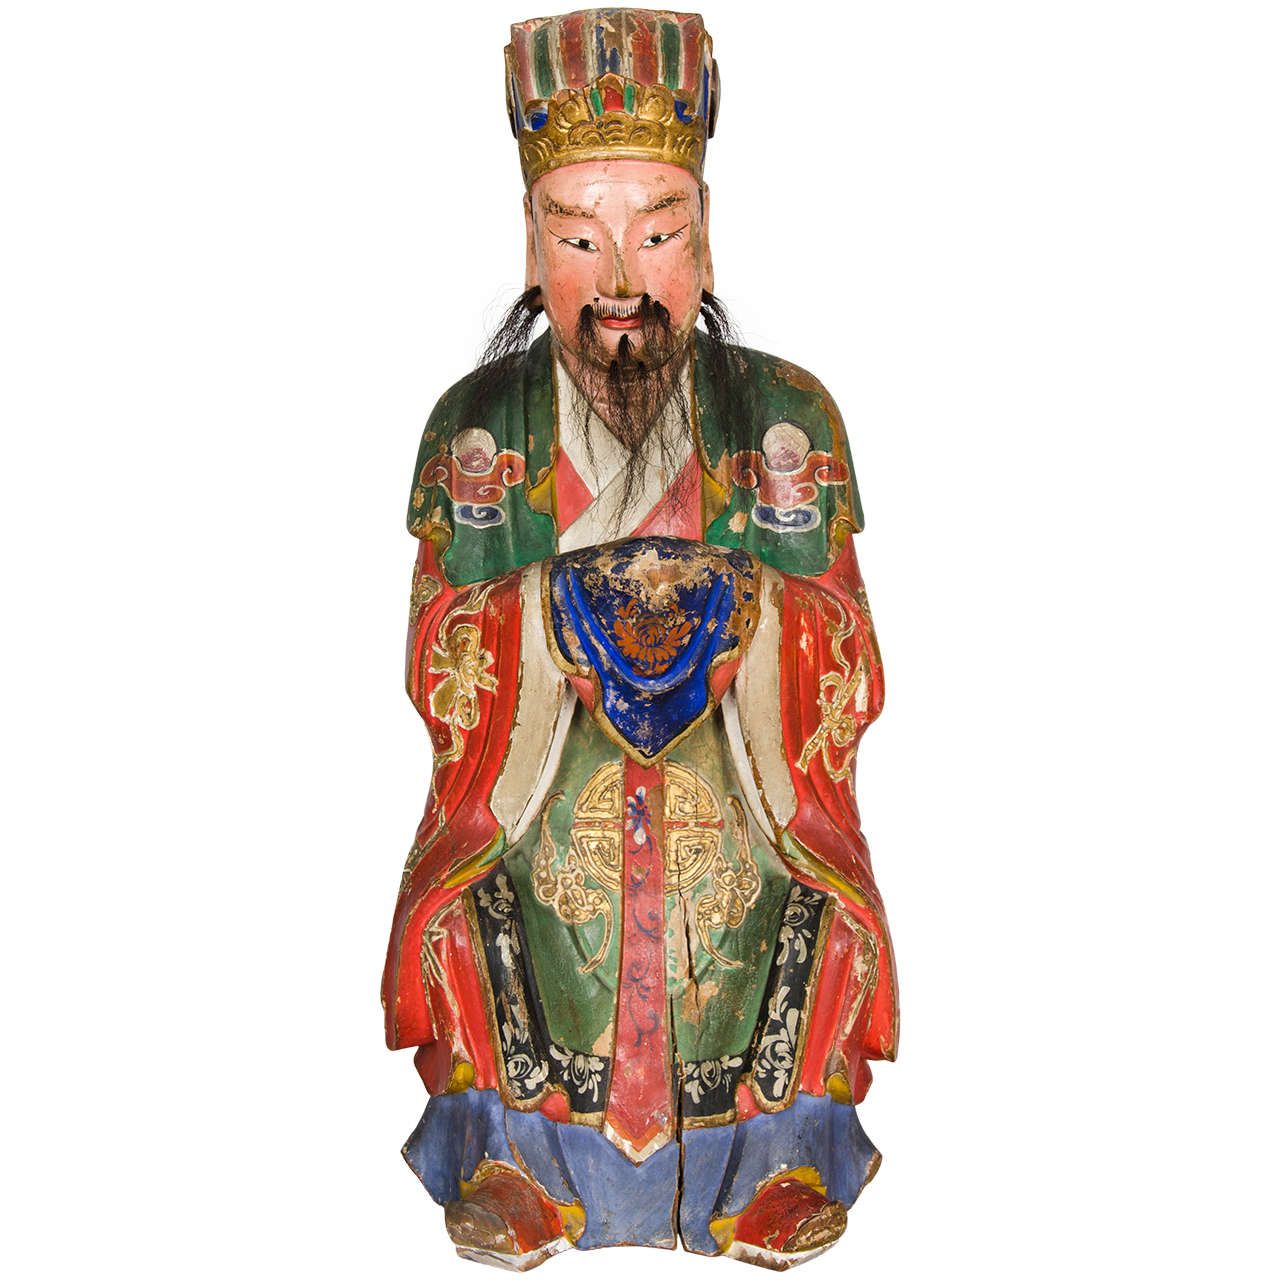 Tall Chinese Wooden Figure of a Sage, Mid-18th Century